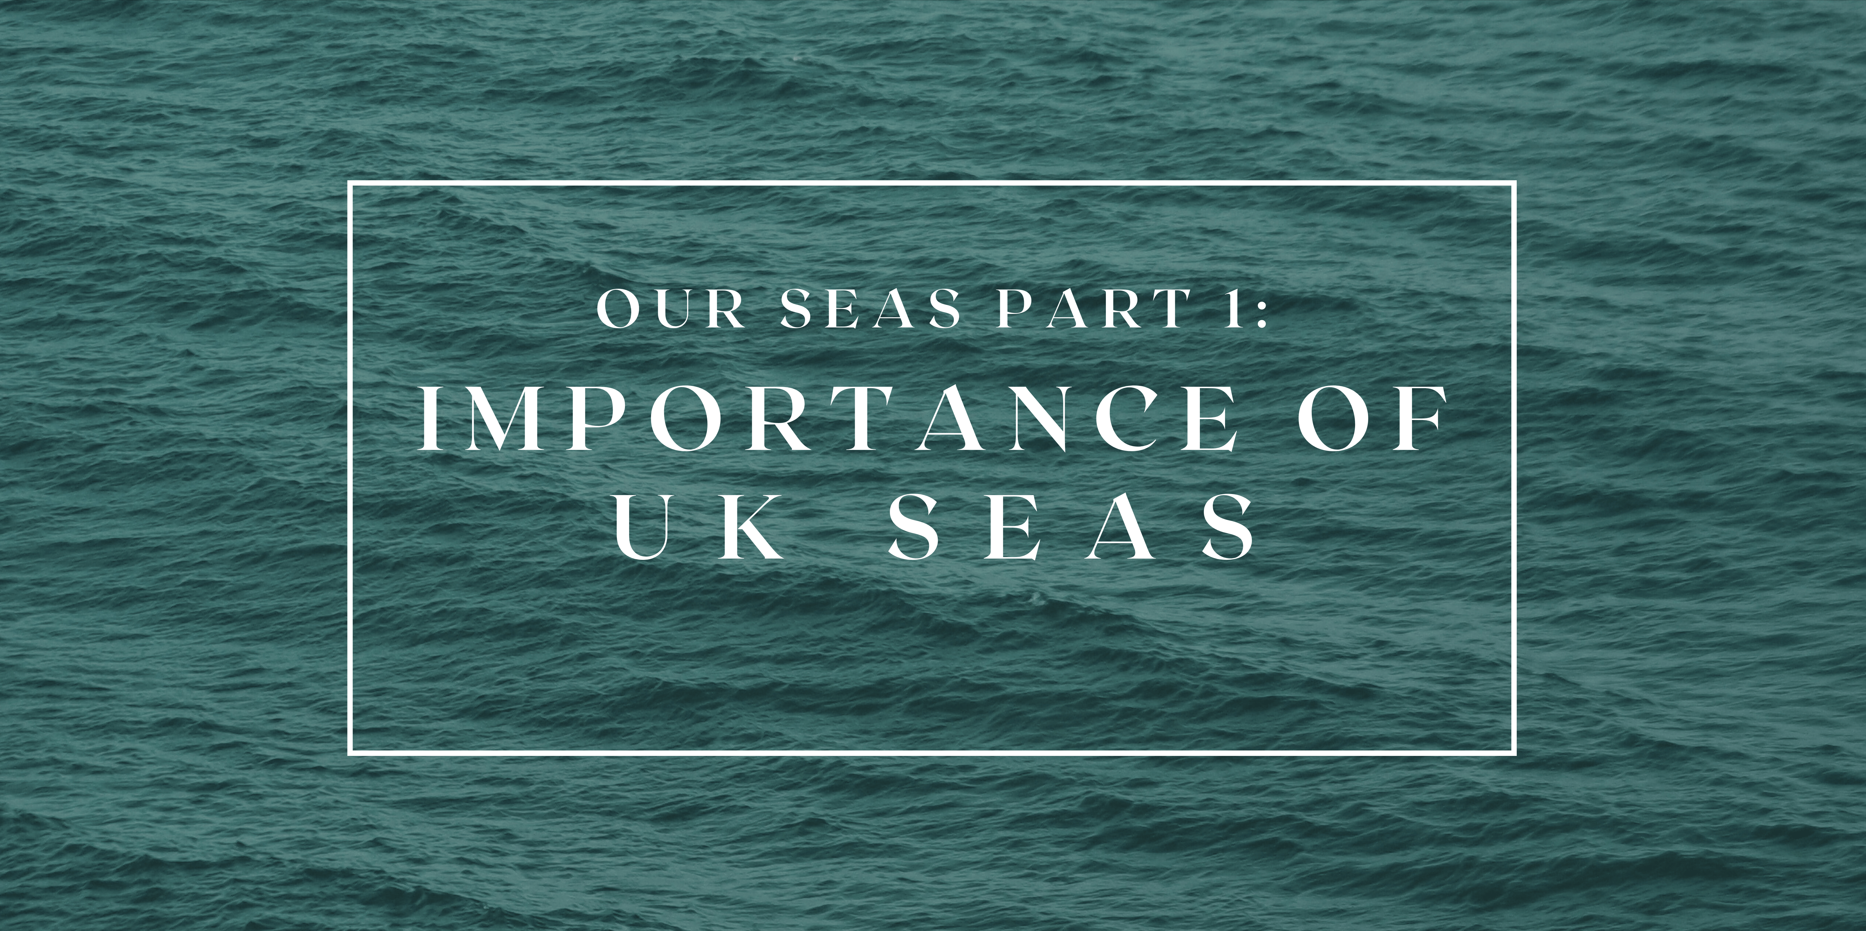 Our Seas Part 1: The Importance of Our Seas